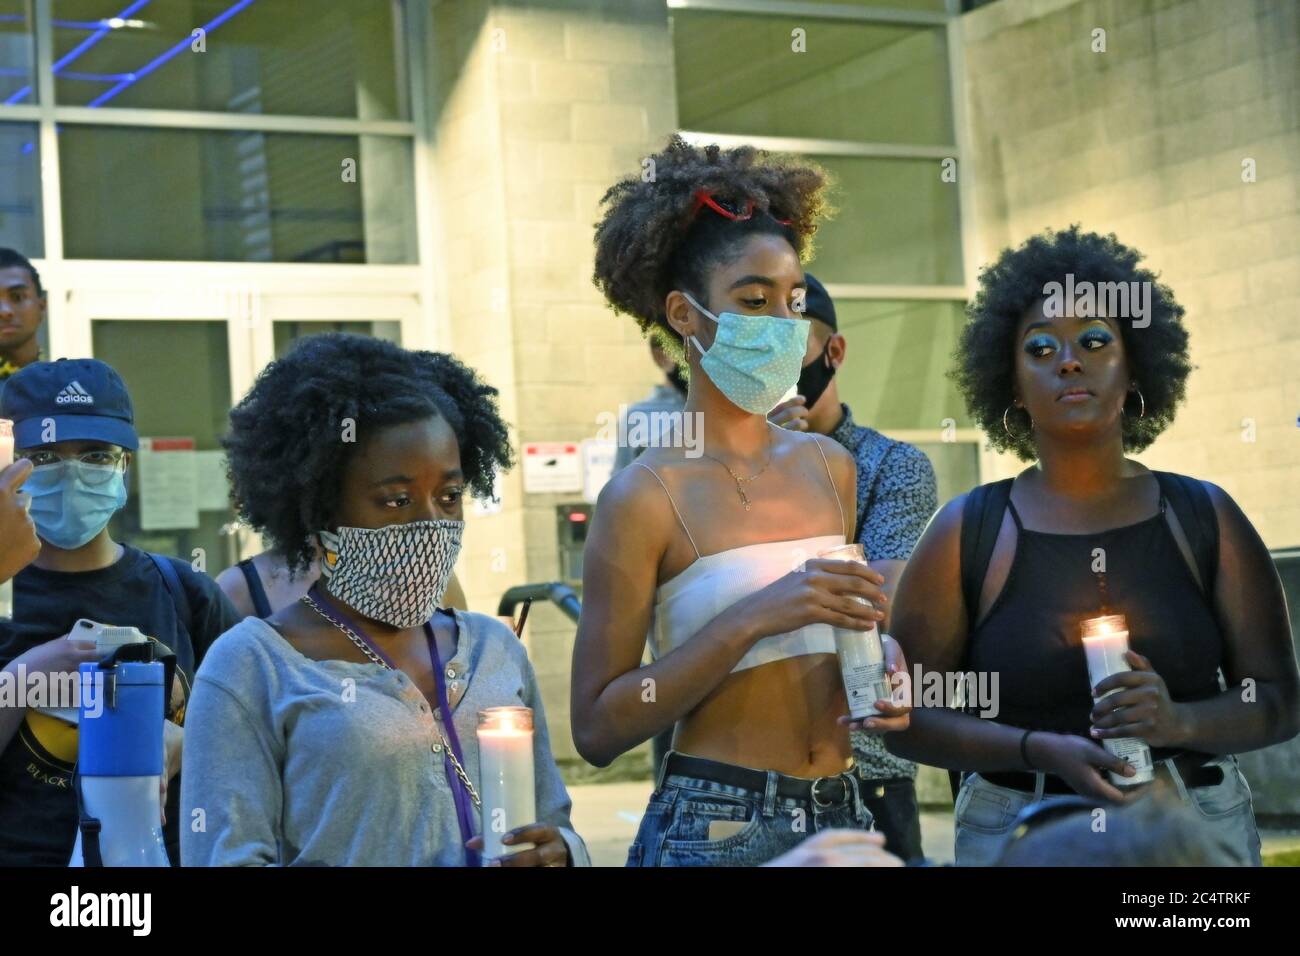 June 24 2020. Seattle WA. BLM protesters at CHAZ are holding candles and mourning the lives taken by violence. Majority is wearing face masks. Stock Photo